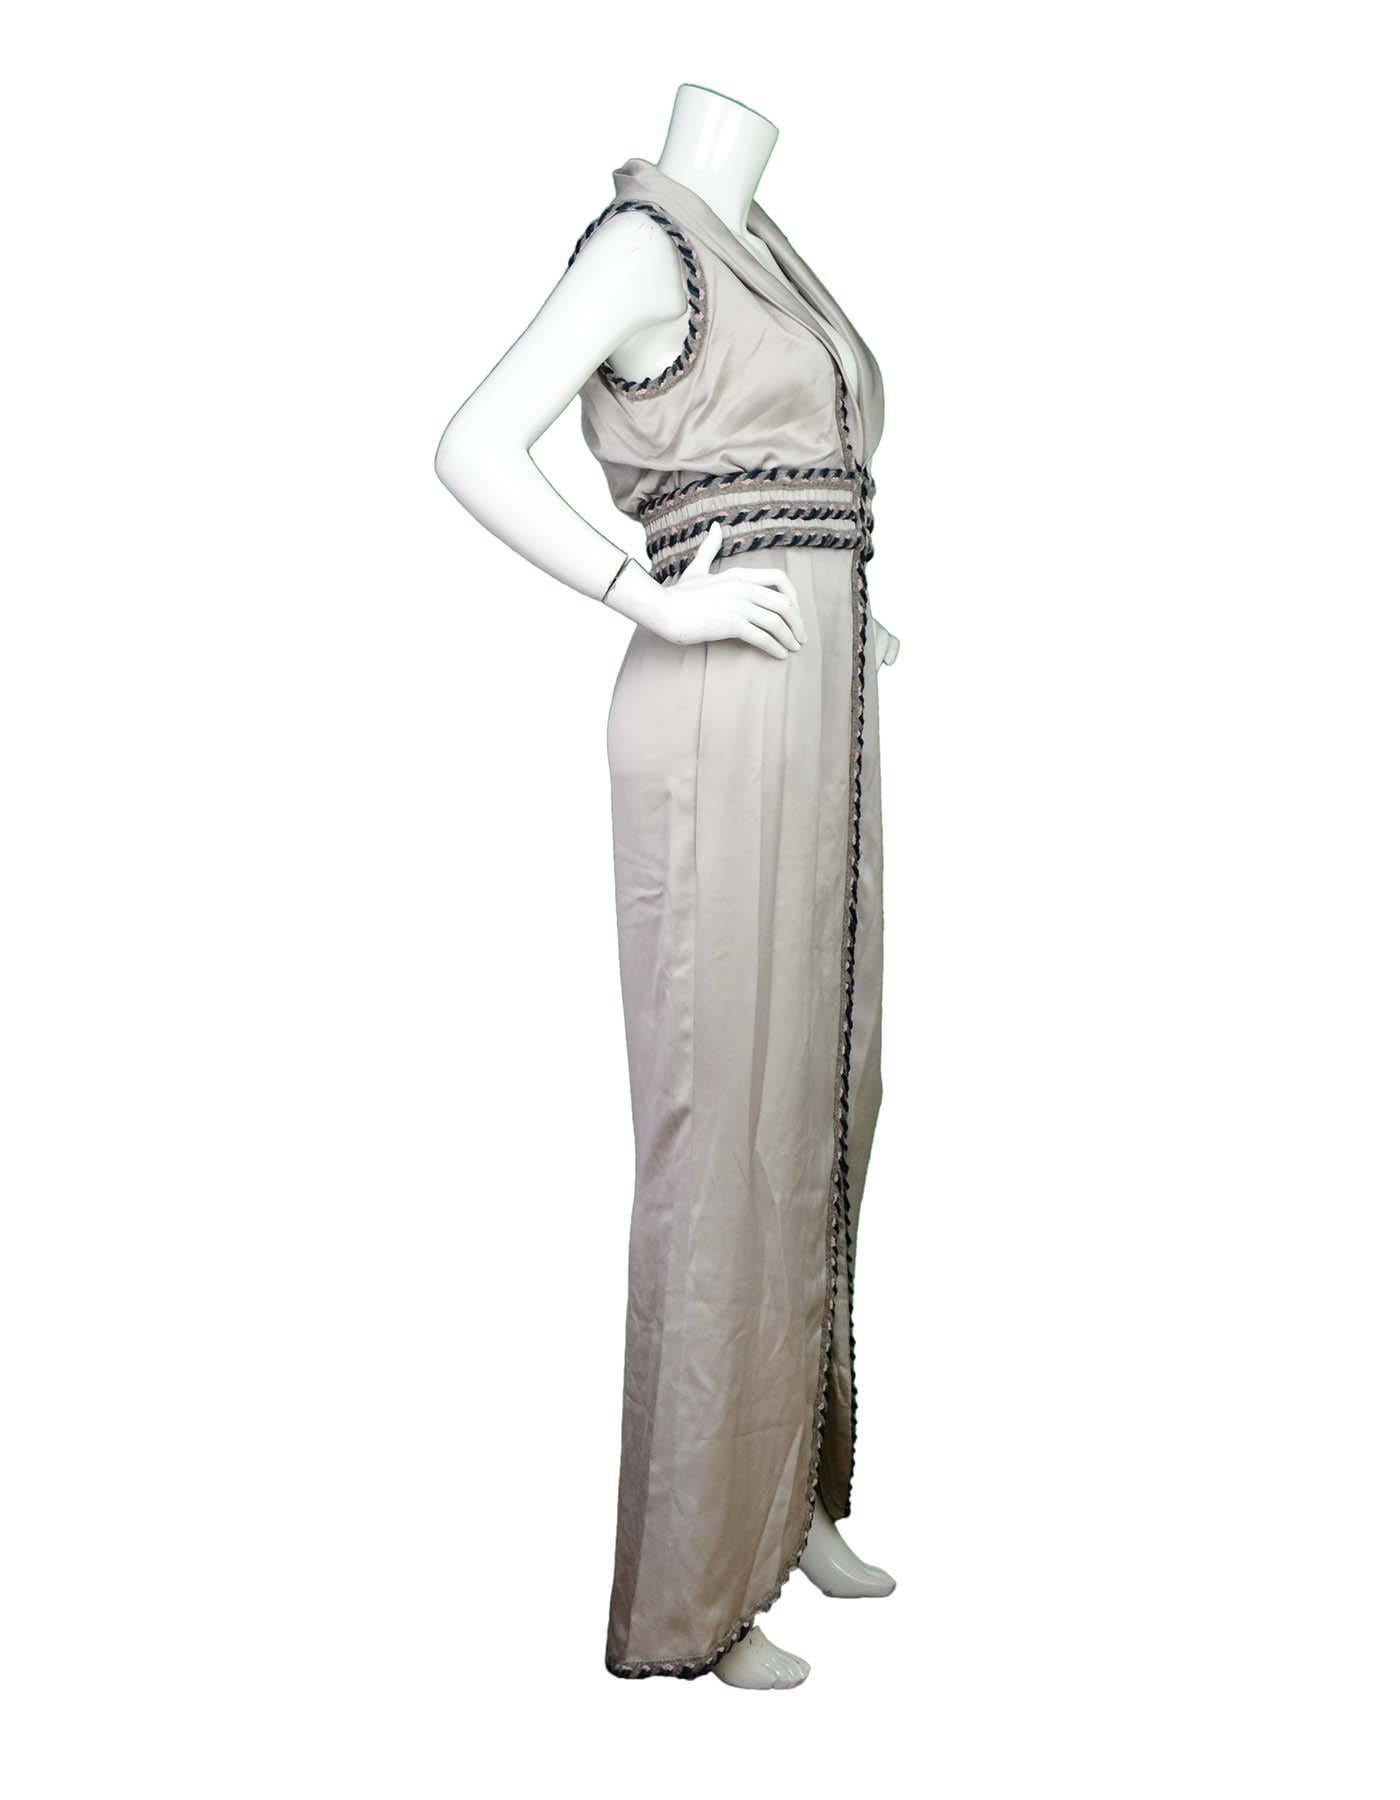 Chanel Grey Long Silk Dress with Tweed Trim Sz 40 NWT

Features draped lapels and tweed trim

Made In: France
Year of Production: 2008 Autumn
Color: Grey, blue, pink
Composition: 100% Silk
Lining: Grey 100% Silk
Closure/Opening: Hidden